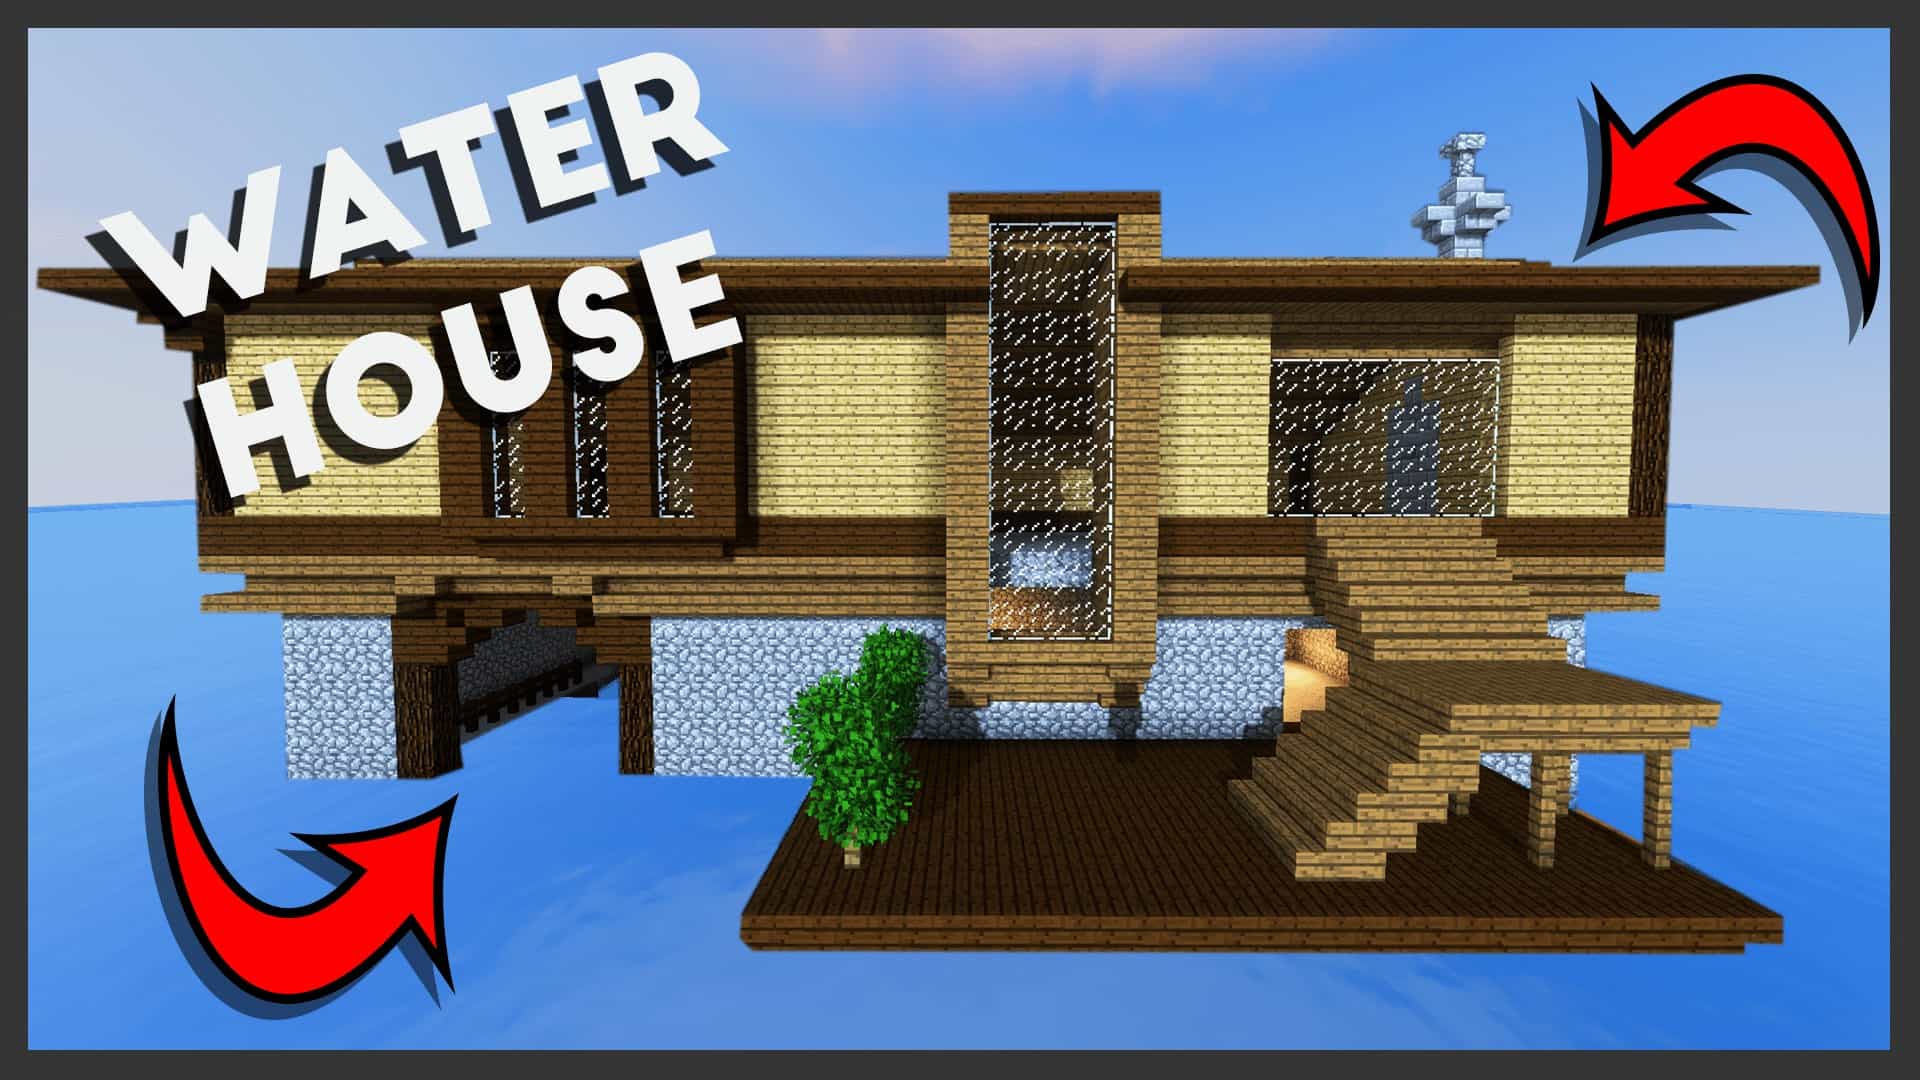 minecraft water houses